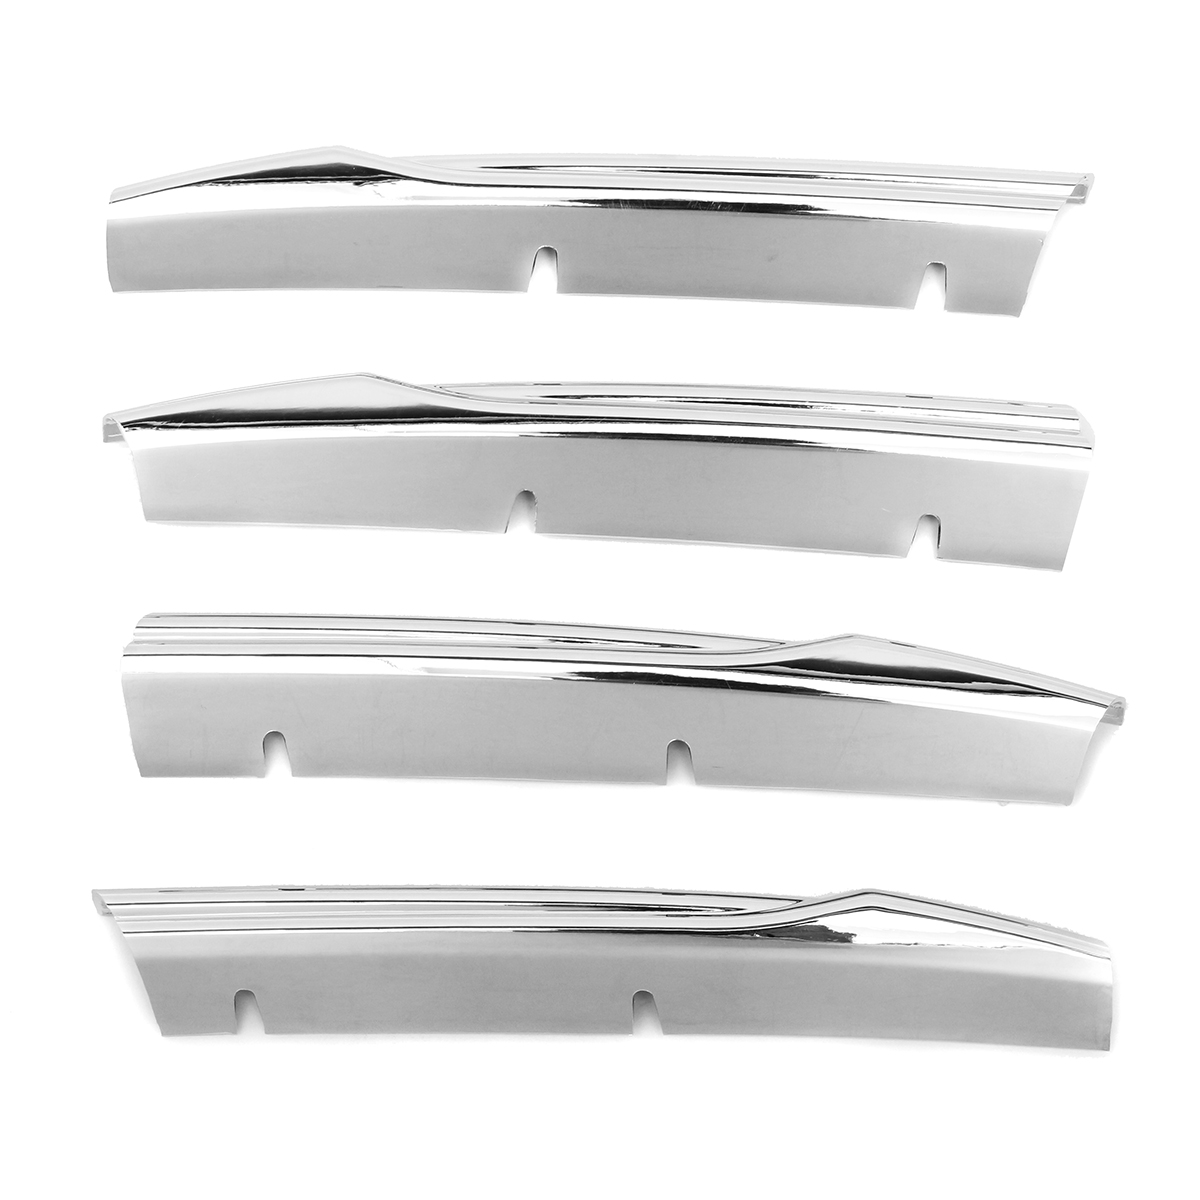 Auto-Front-Air-Grille-Cover-ABS-Chorme-Decoration-Trim-Strips-For-Audi-A3-Sedan-1405672